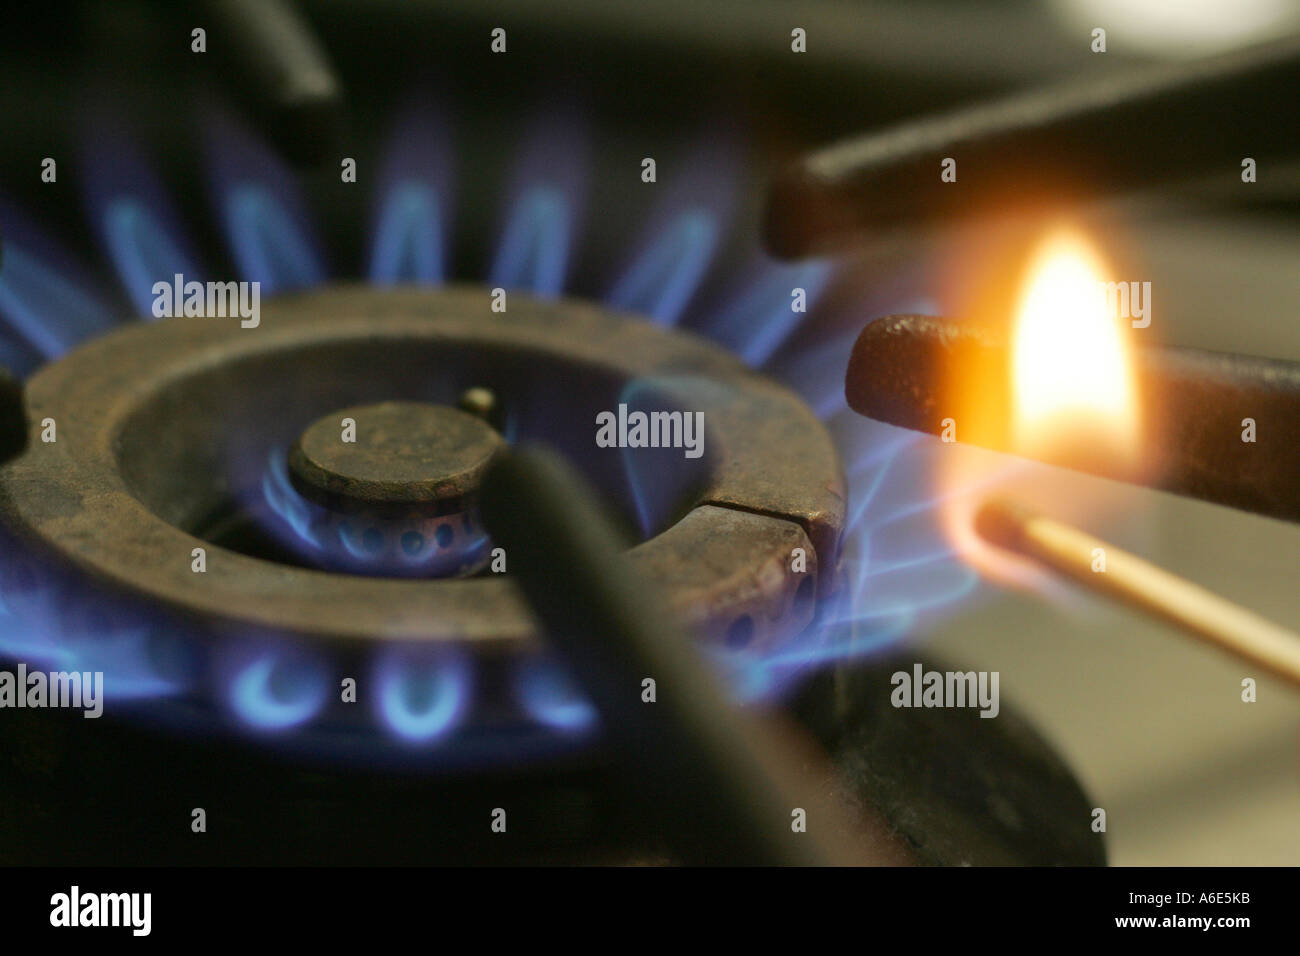 Gas cooker Stock Photo